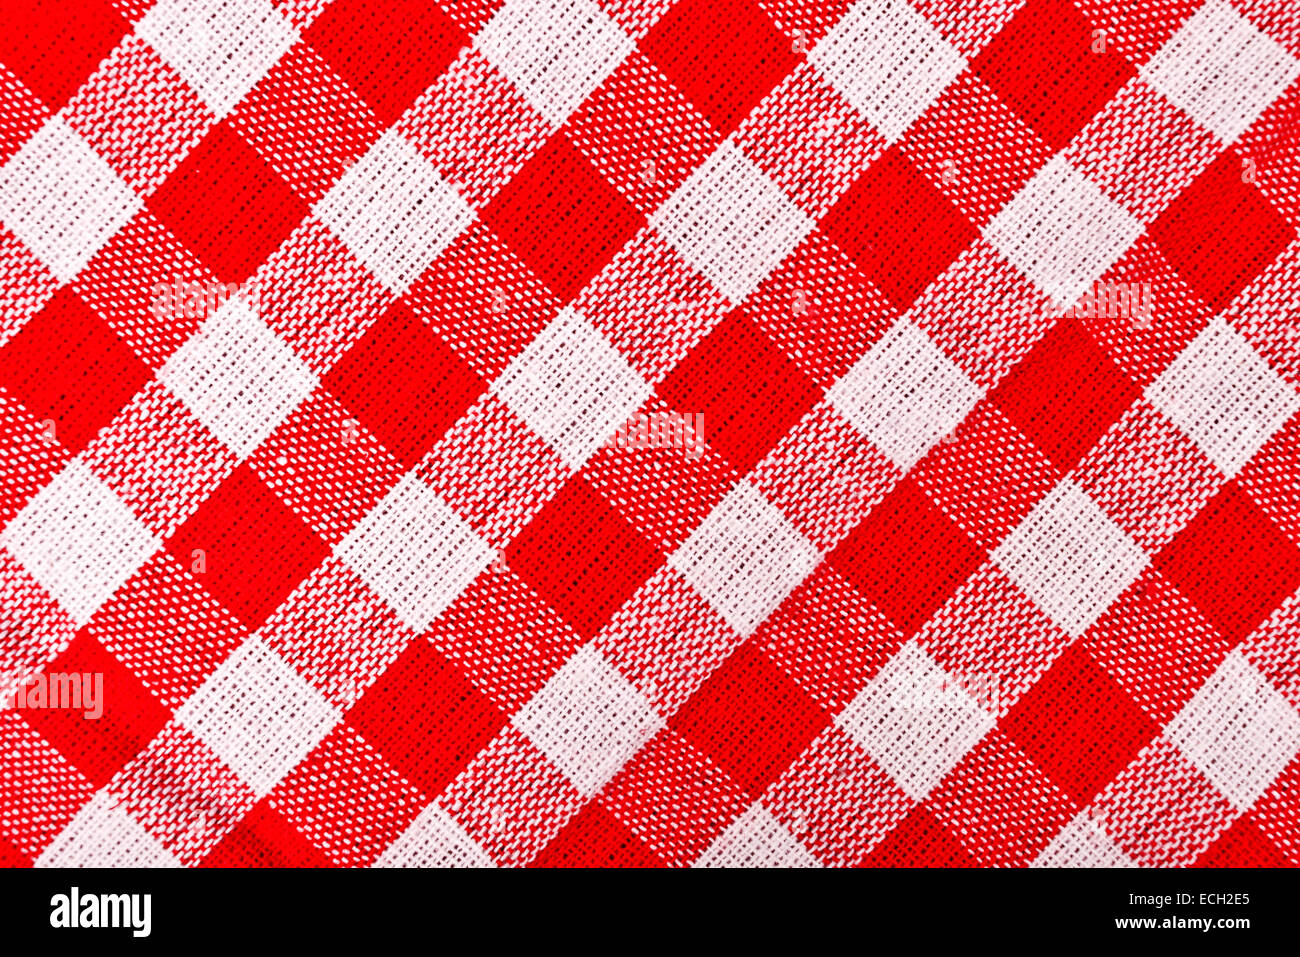 Red and white checkered tablecloth pattern texture as background Stock Photo